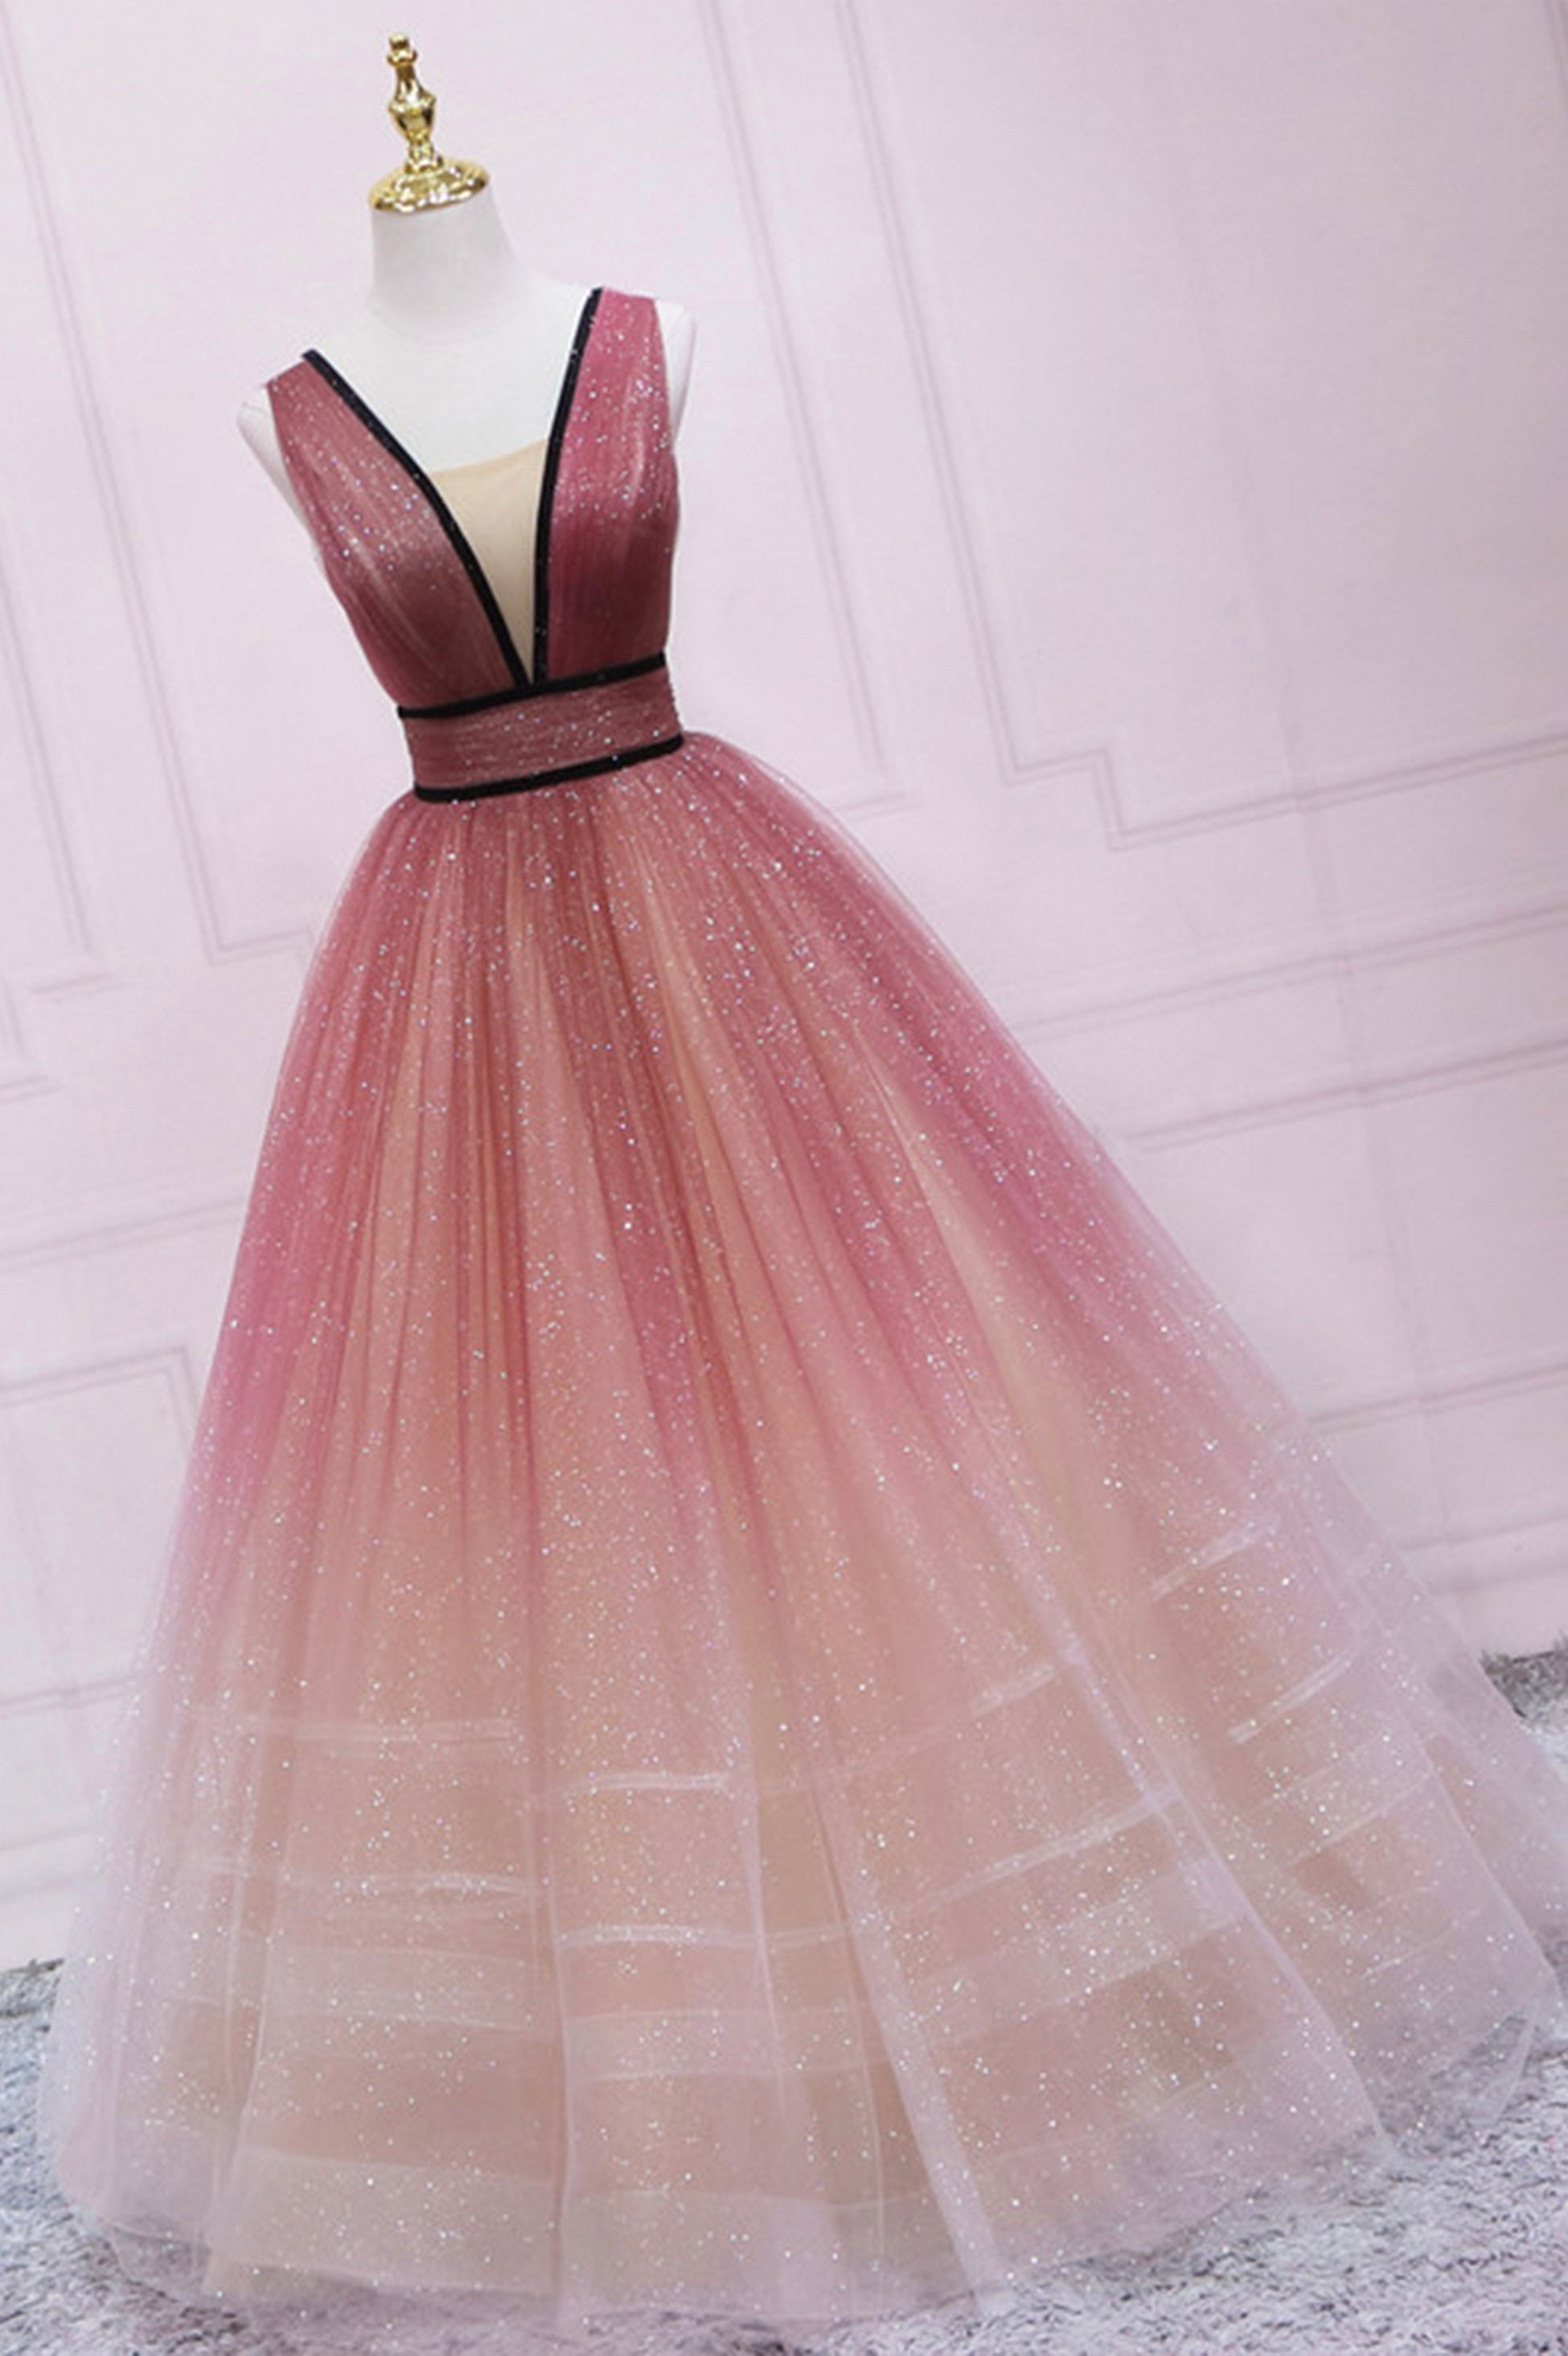 Bridesmaid Dress Blushing Pink, Cute Ombre Tulle V-Neck Long Party Dress, A-line Prom Dress